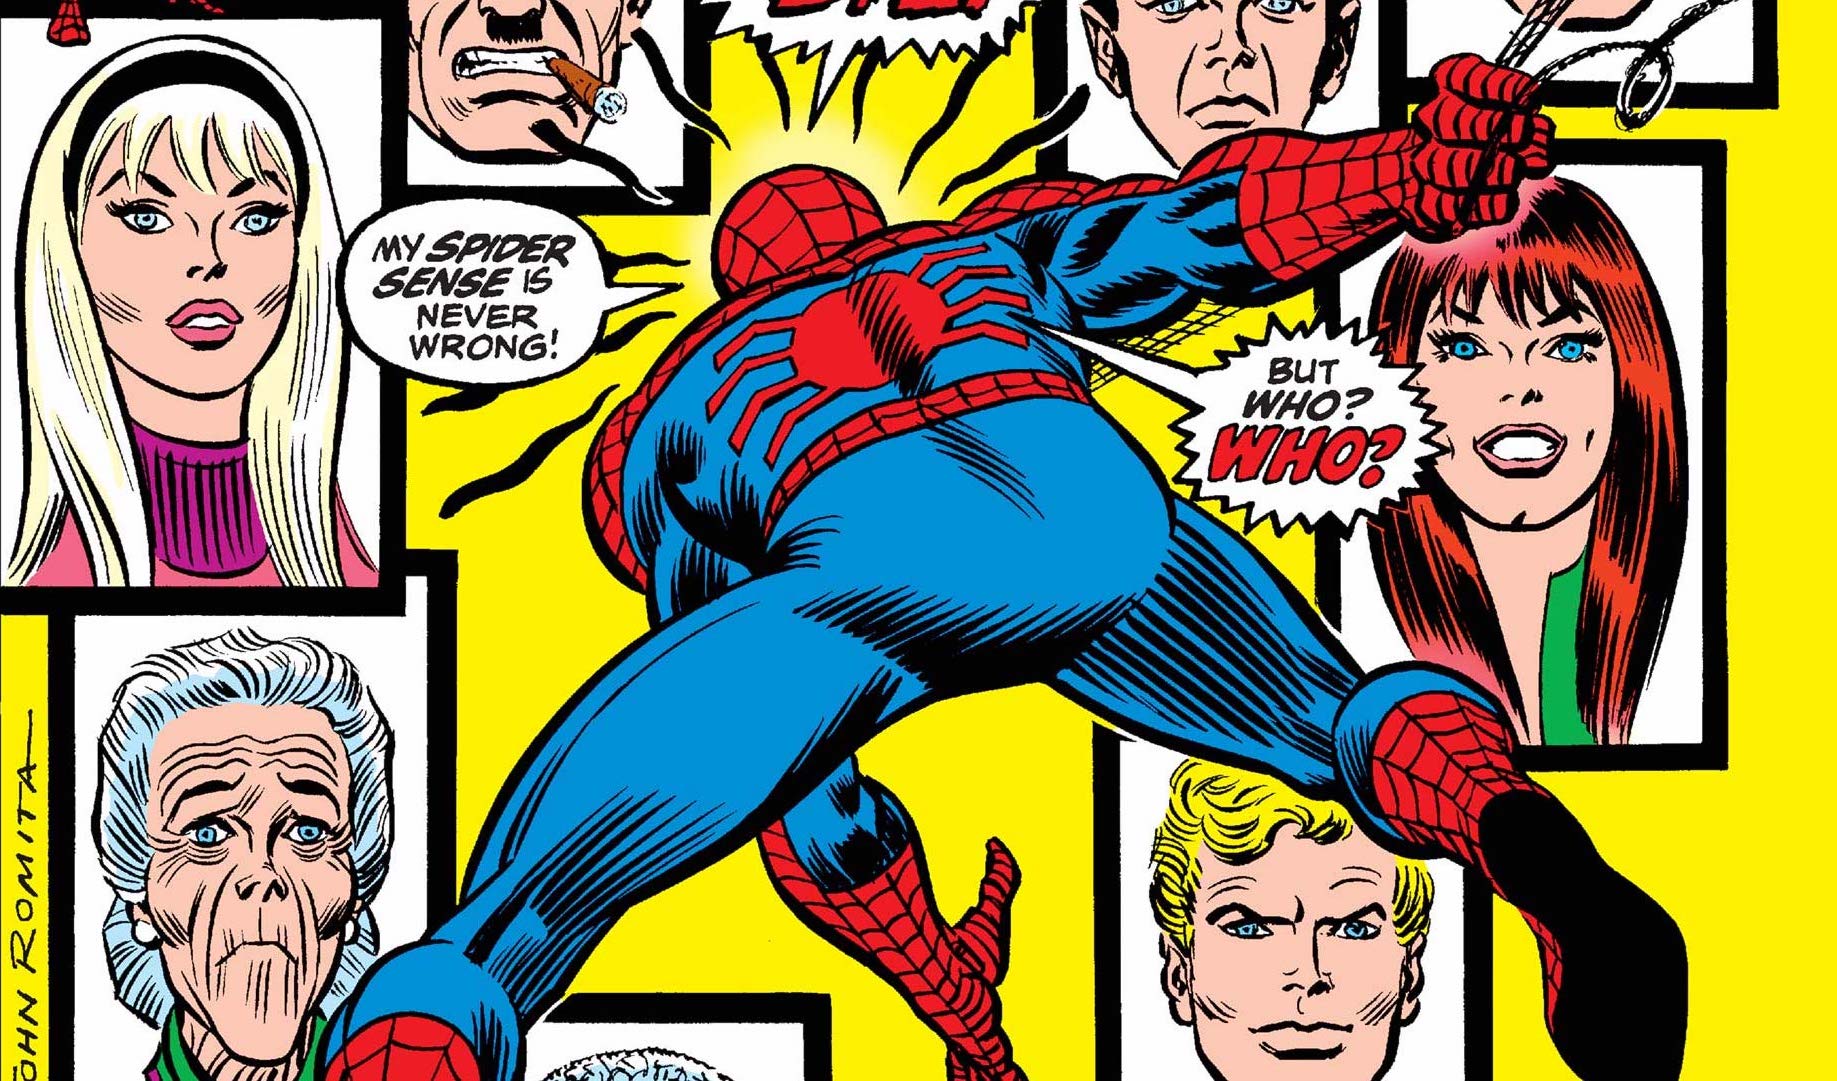 Marvel Spotlight (1971-1977) #2 by Gerry Conway